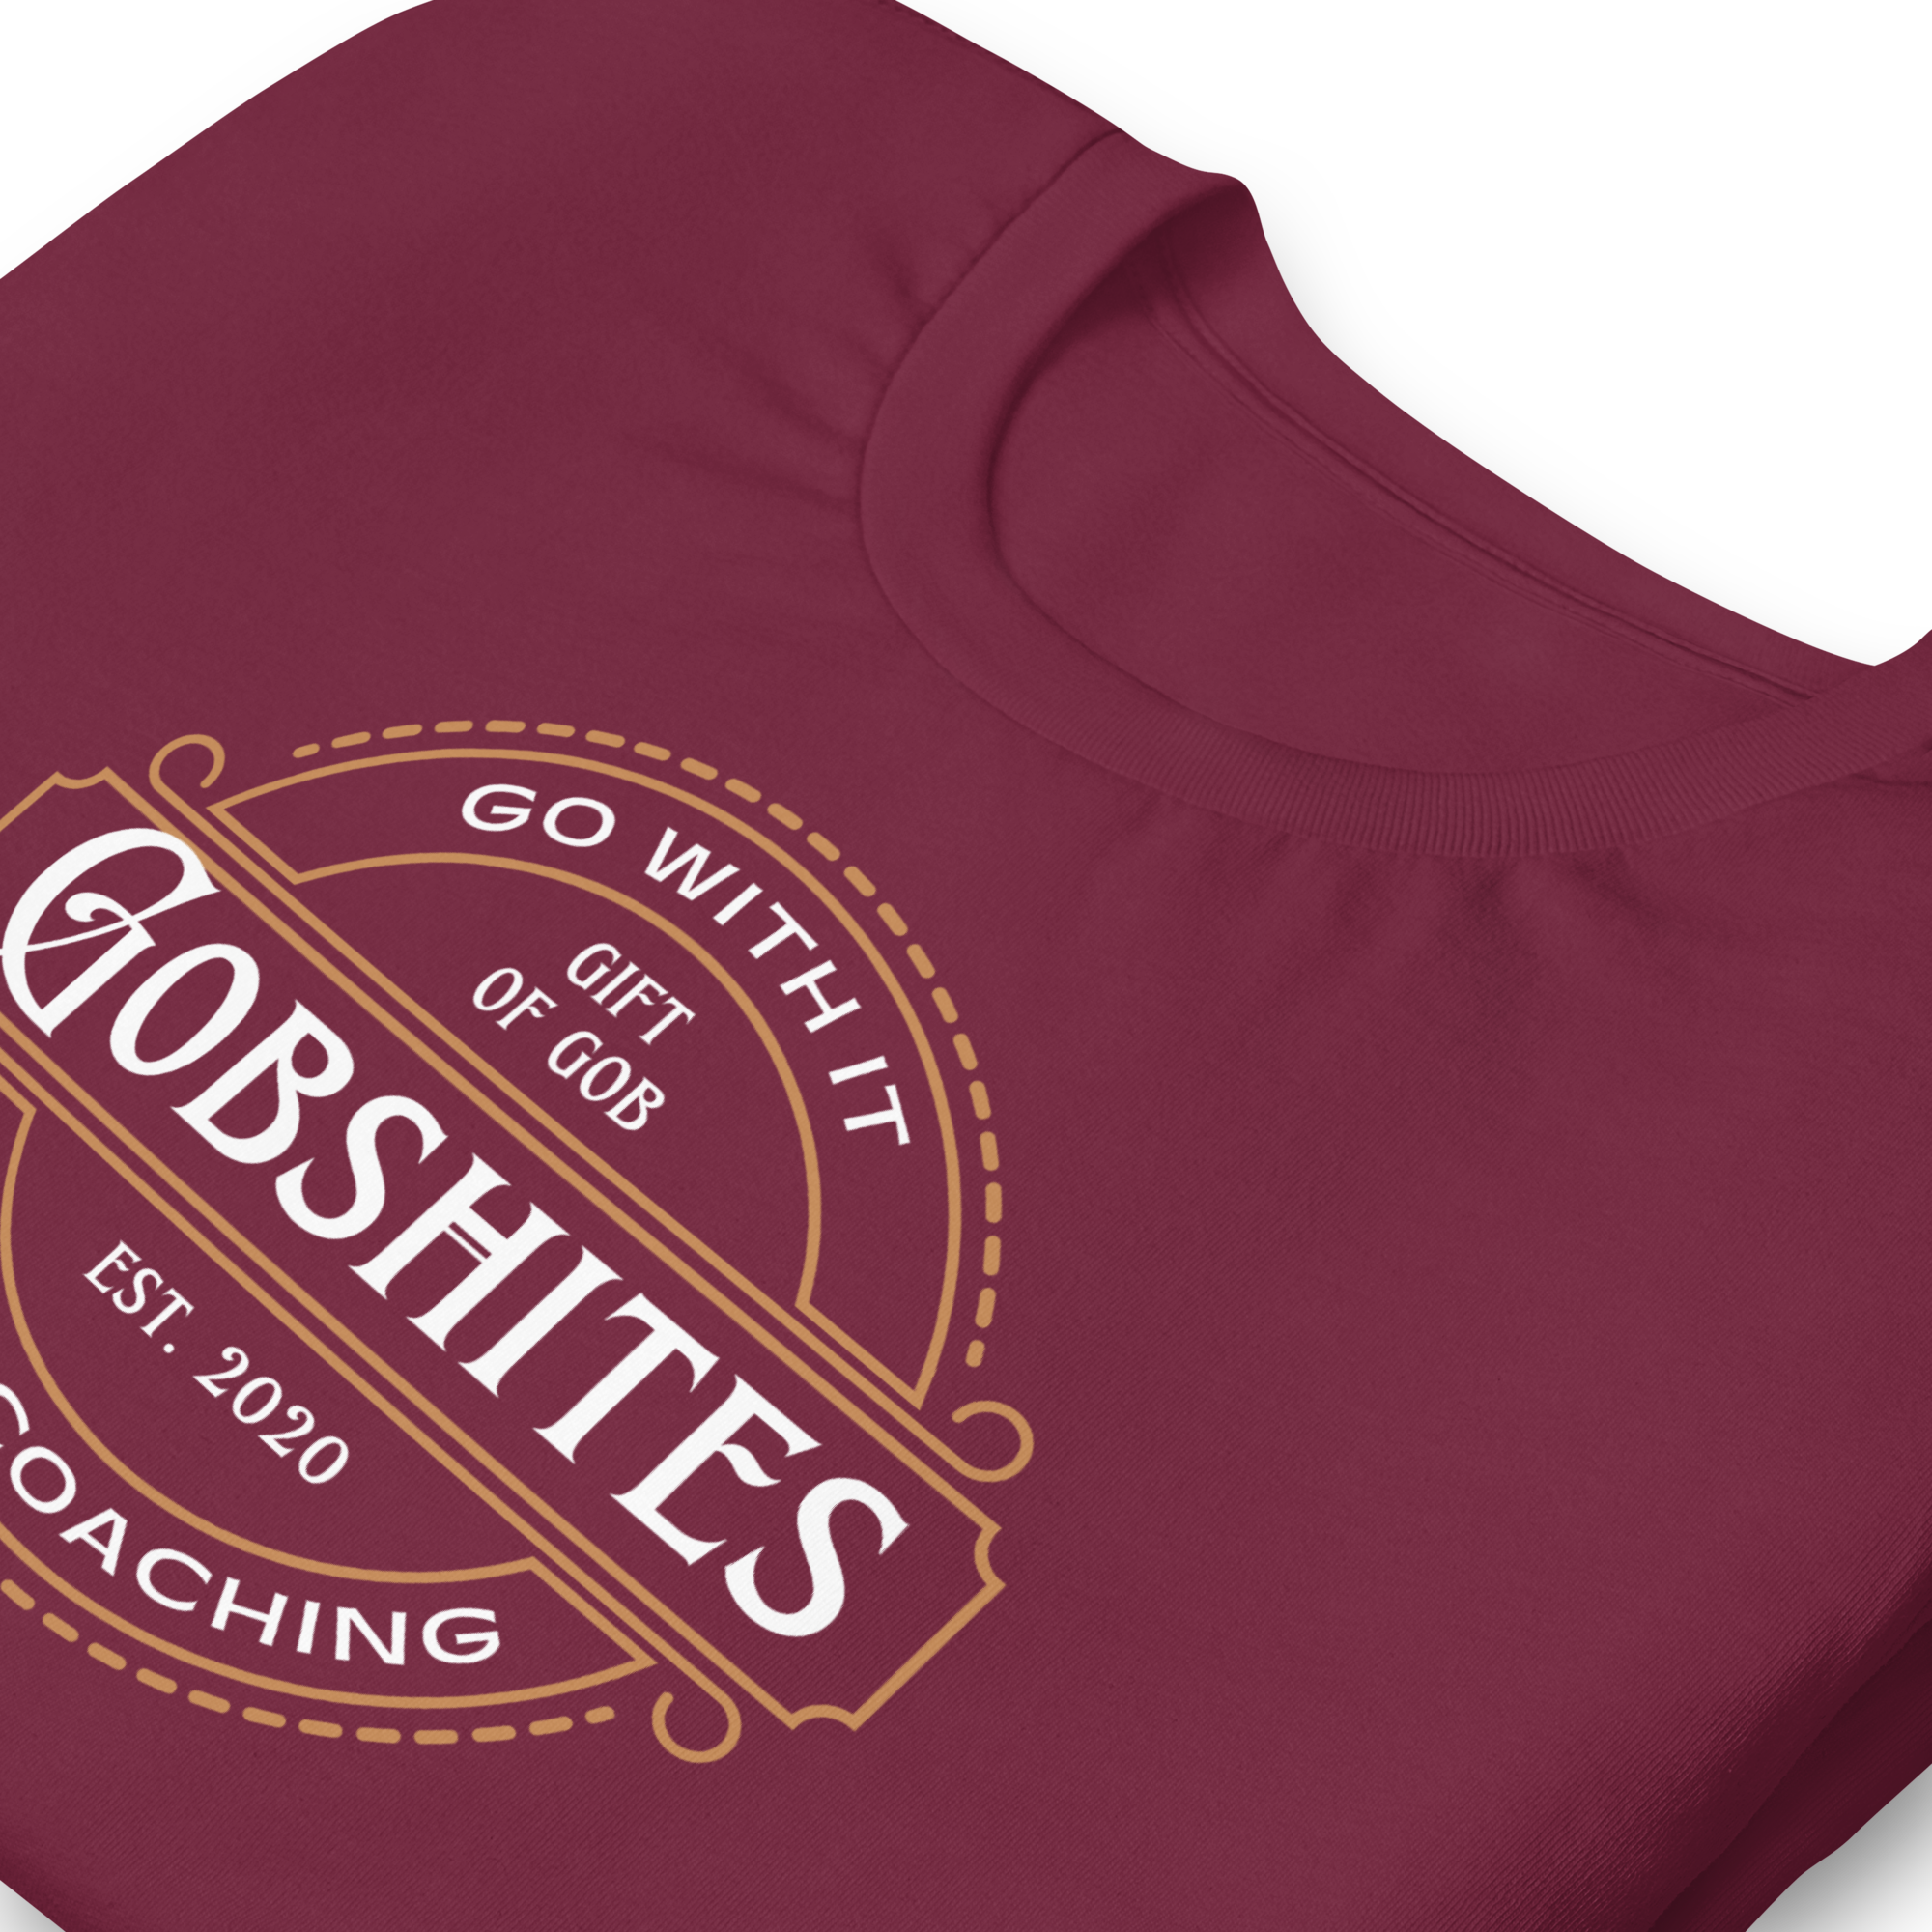 Start the New Year right with Gobshites Life Coaching